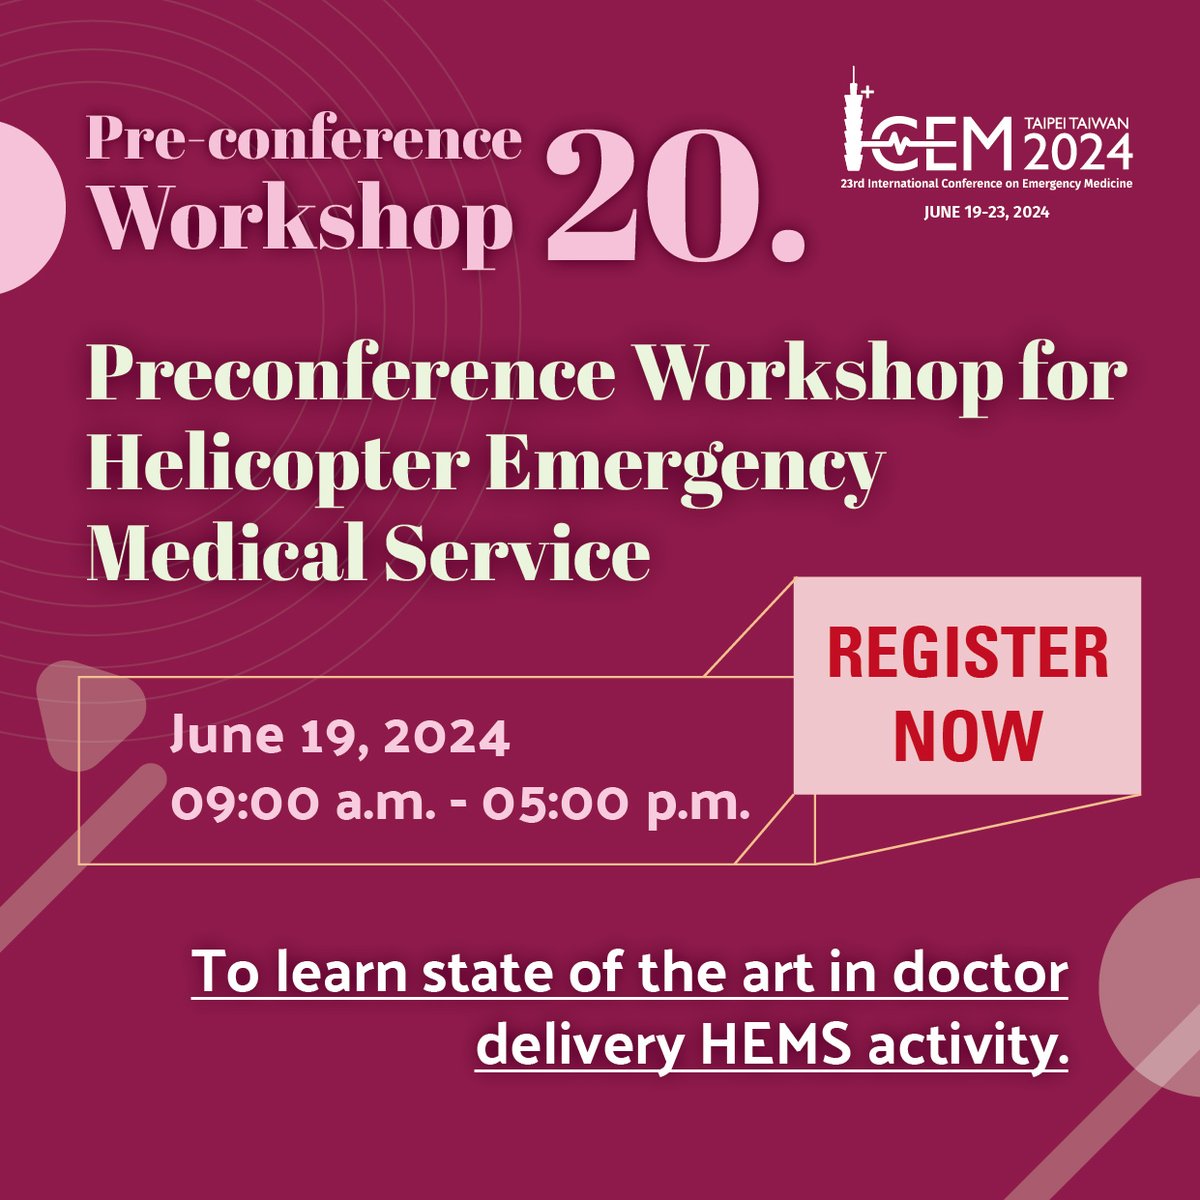 Calling all emergency medicine professionals! Elevate your skills with our preconference workshops designed to sharpen your clinical expertise and enhance patient care. Learn more and register at ICEM24.com